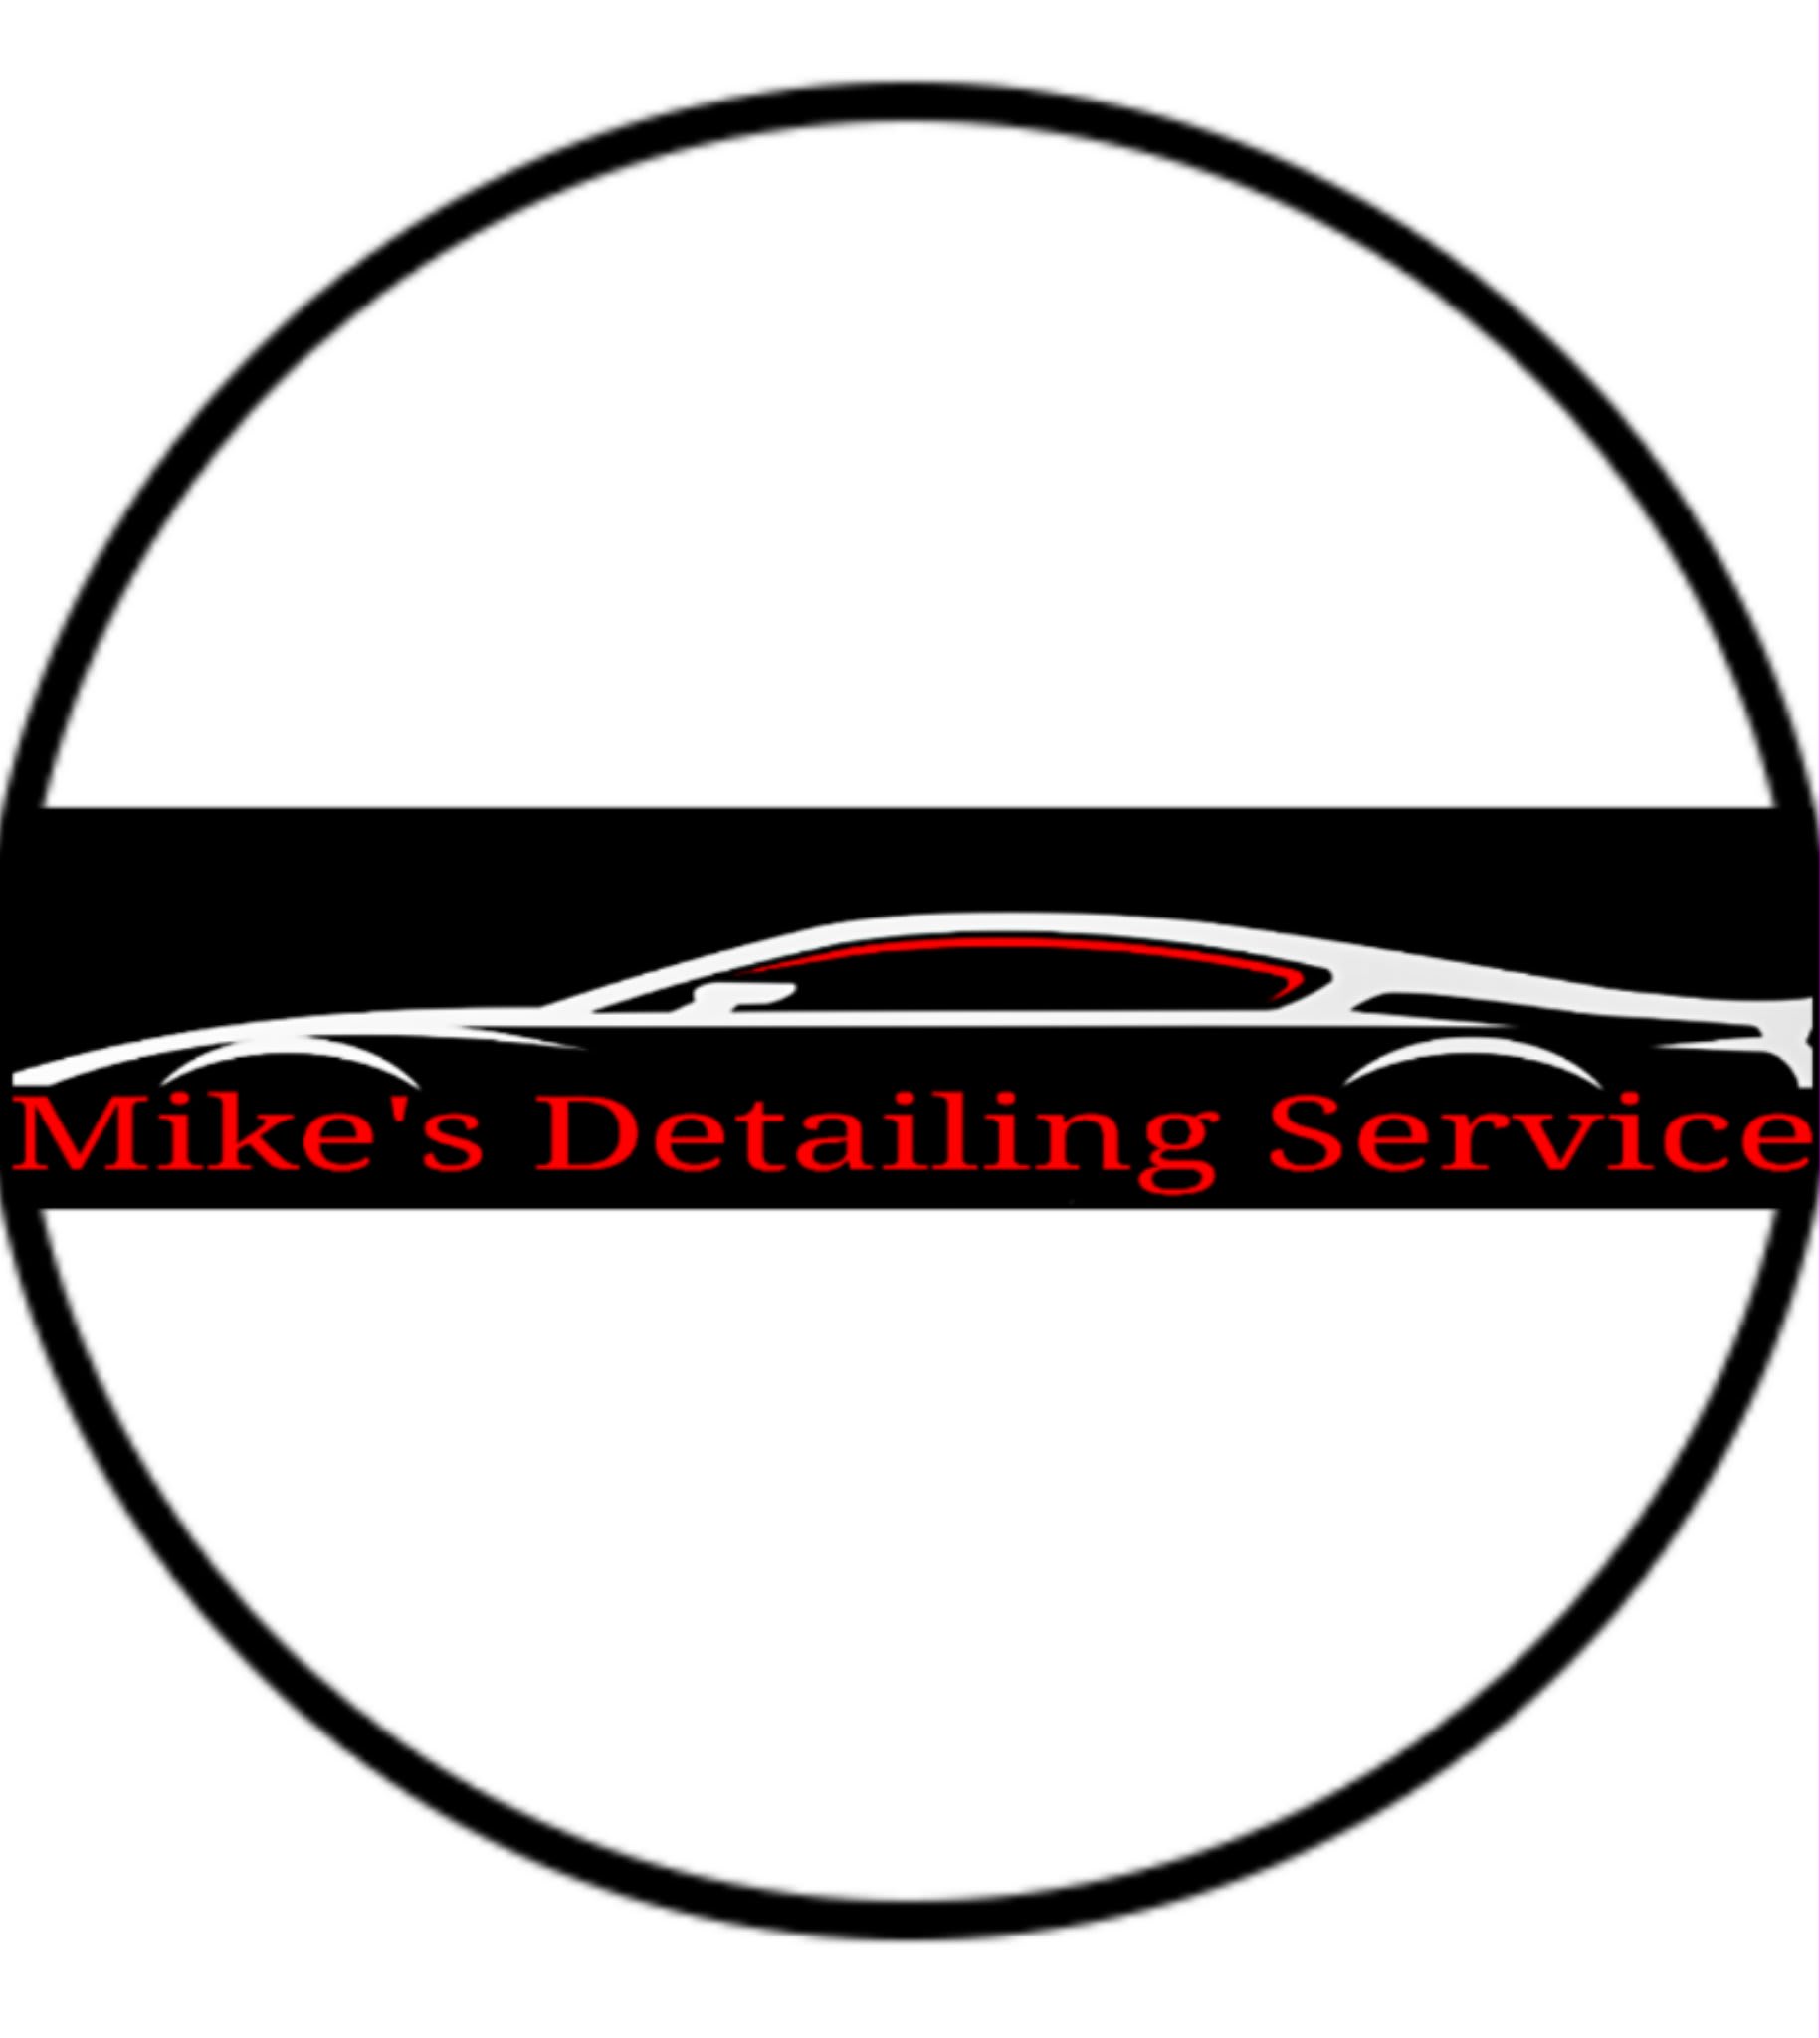 Mike's Detailing Service